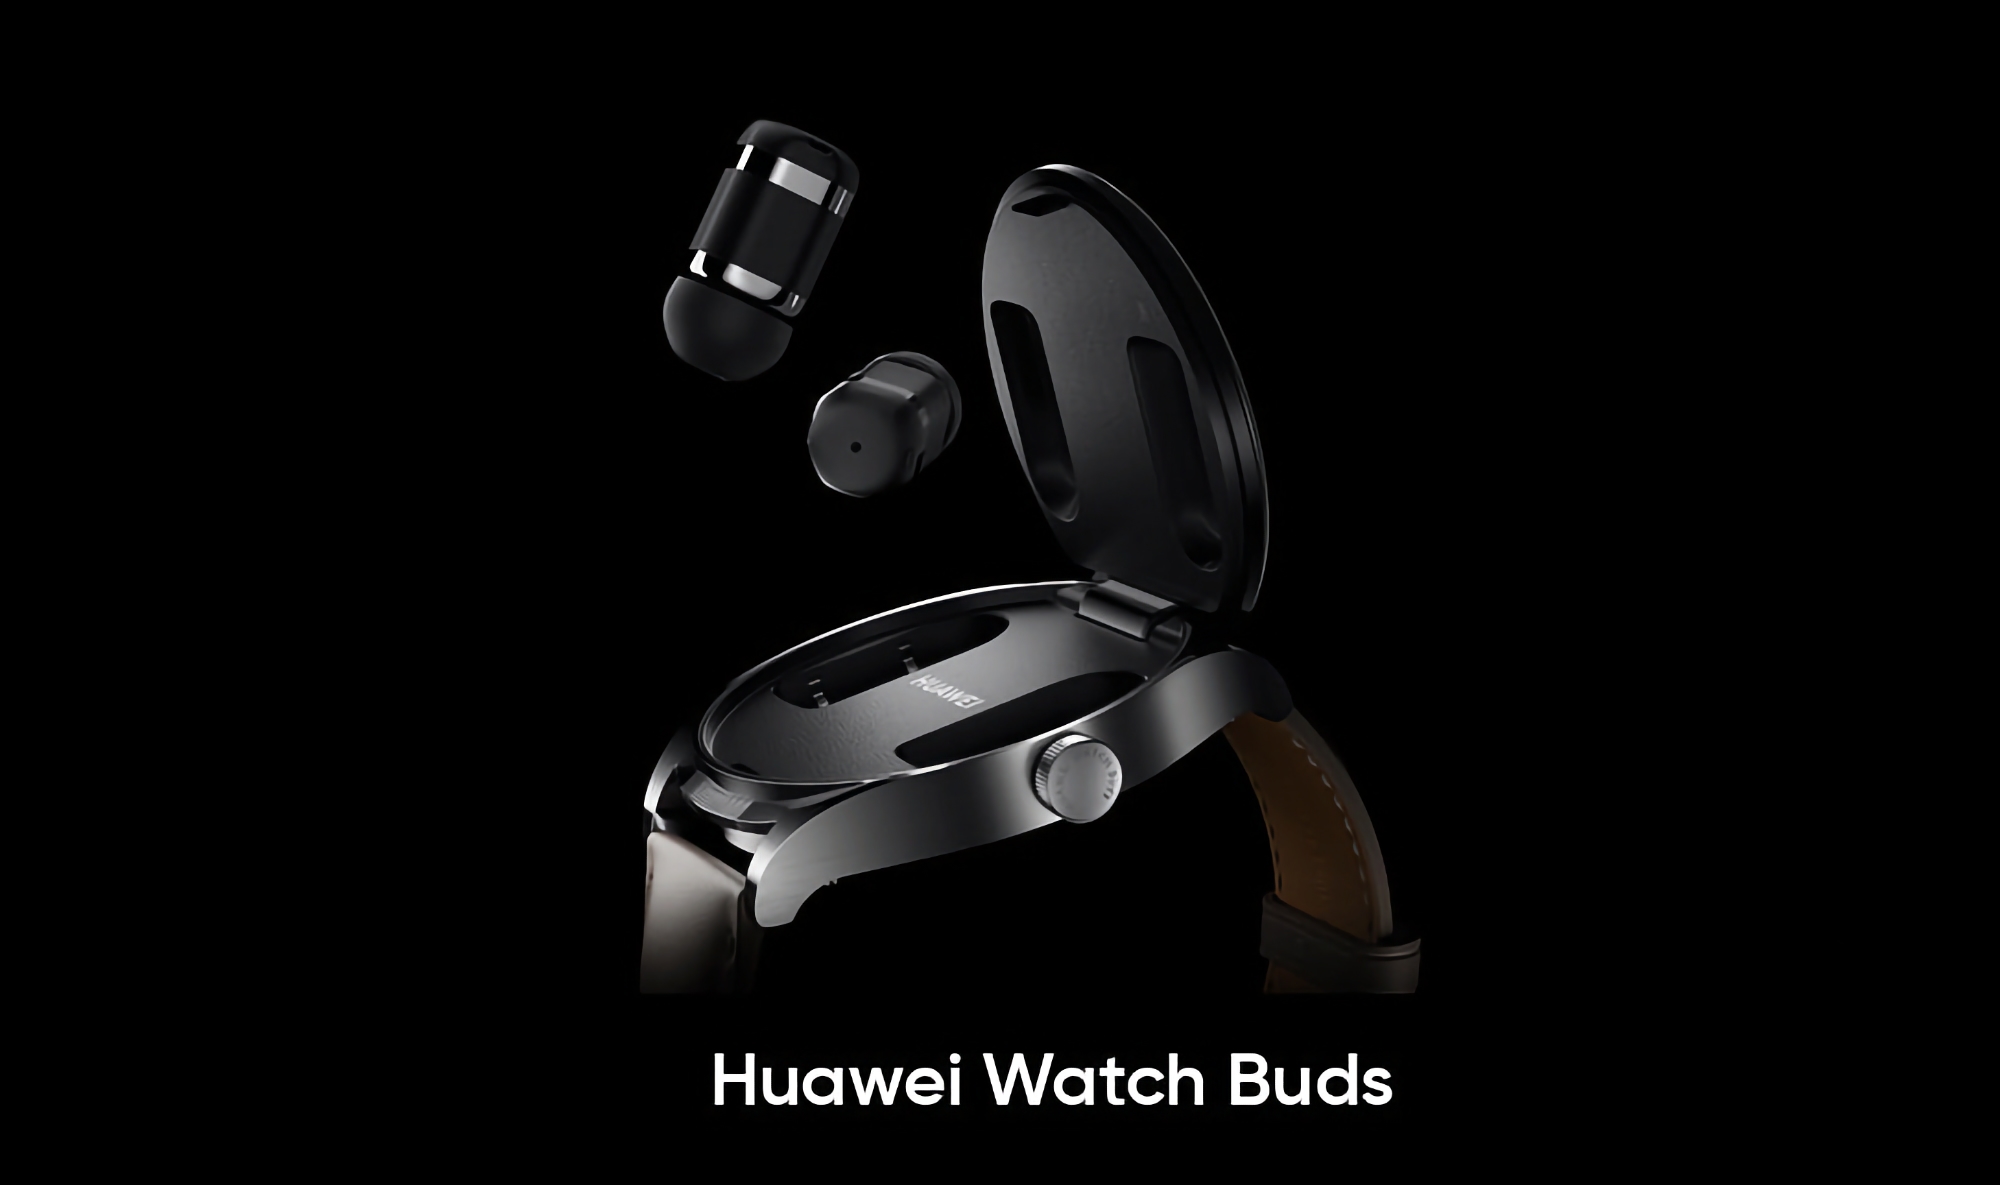 Rumour: Huawei Watch Buds with AMOLED screen, SpO2 sensor and built-in headphones to be launched globally